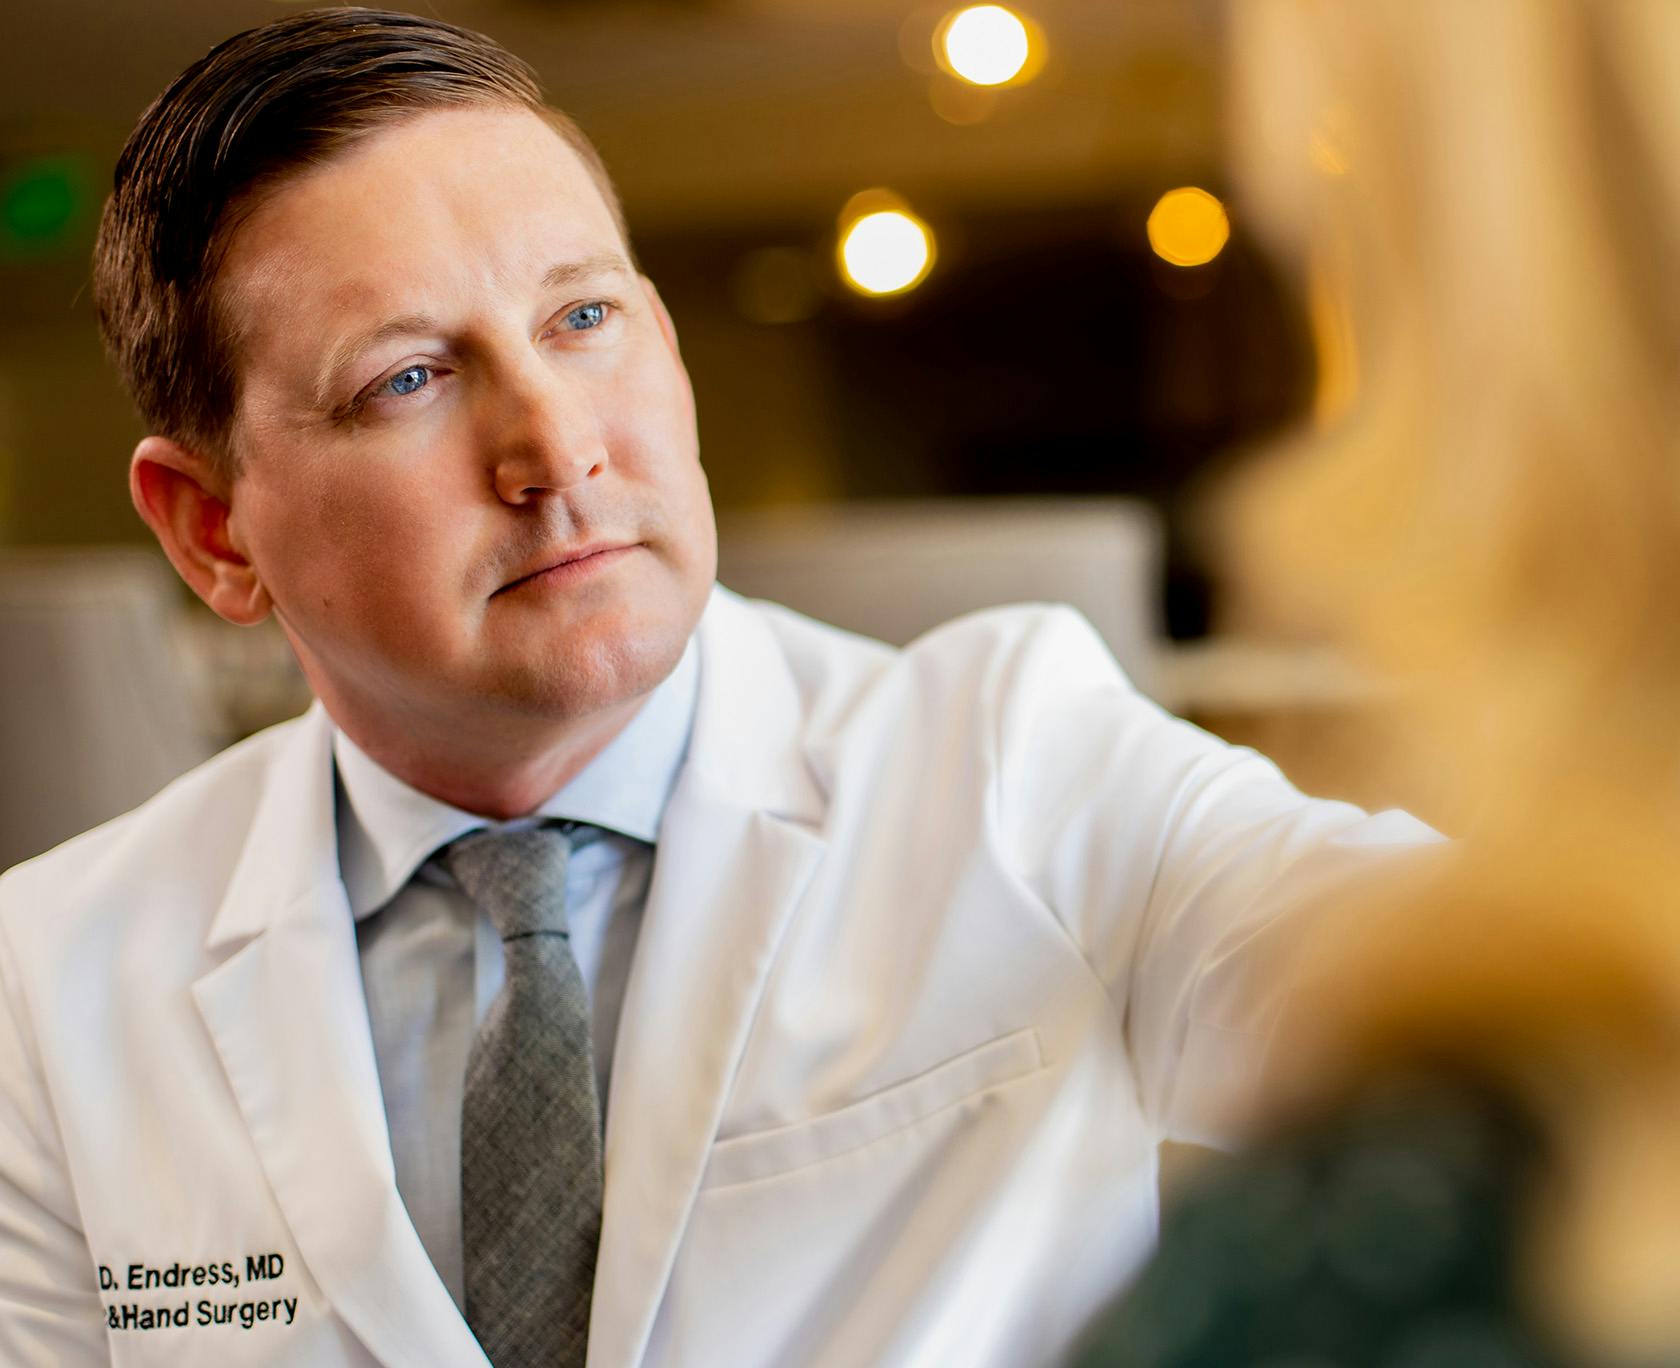 Dr. Ryan Endress with Lavie Institute in a white coat and tie looking at a patient